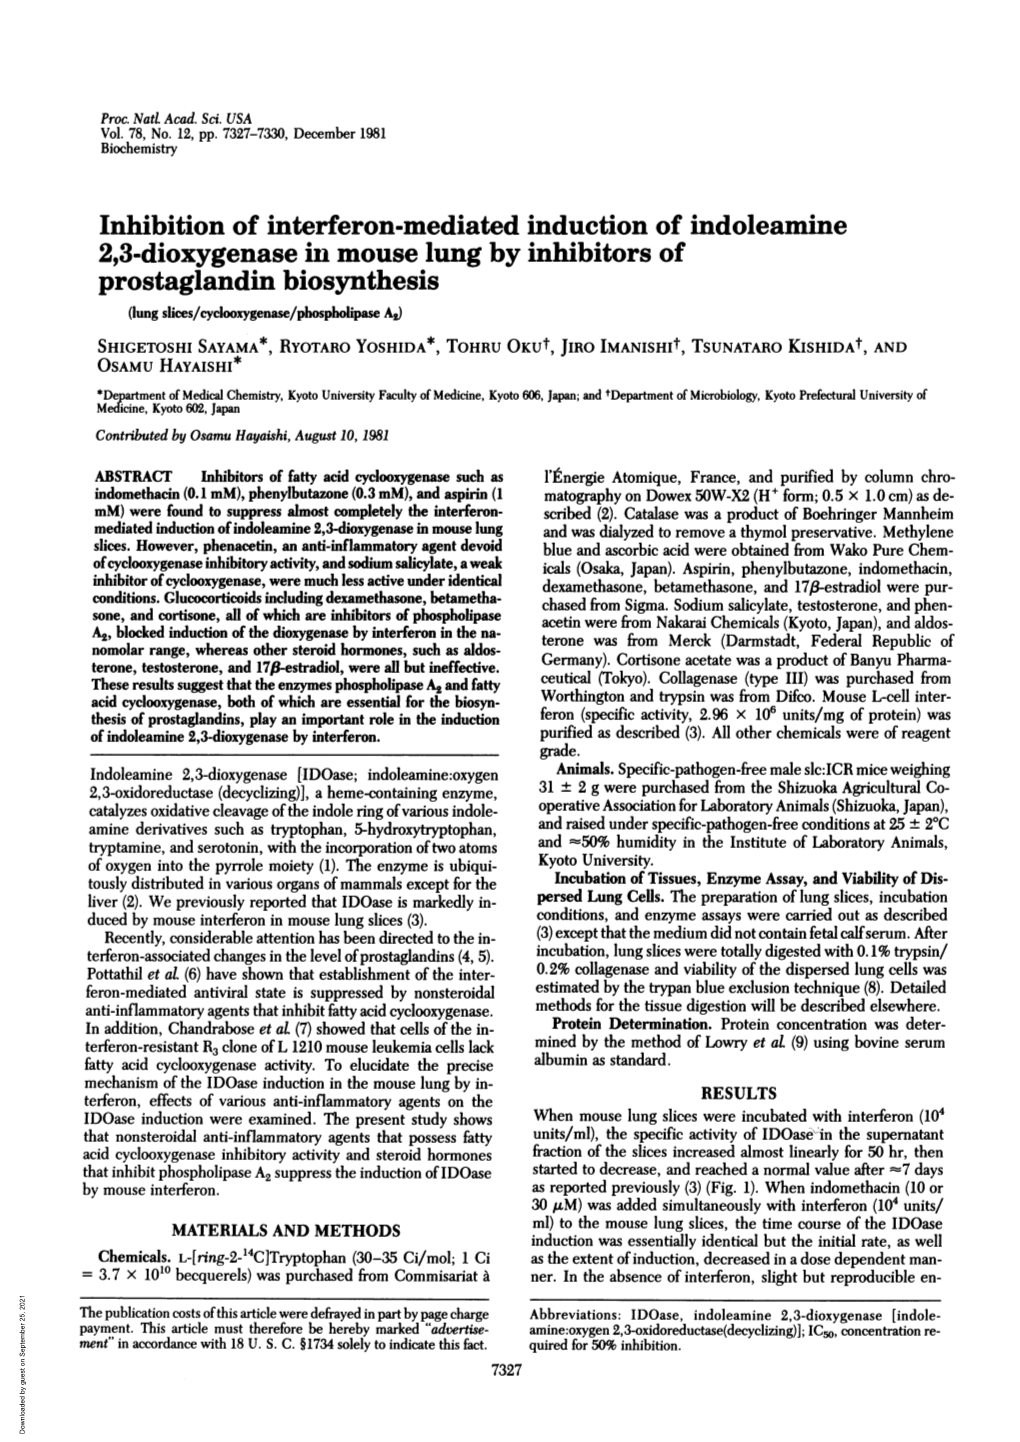 Inhibition of Interferon-Mediated Induction of Indoleamine 2,3